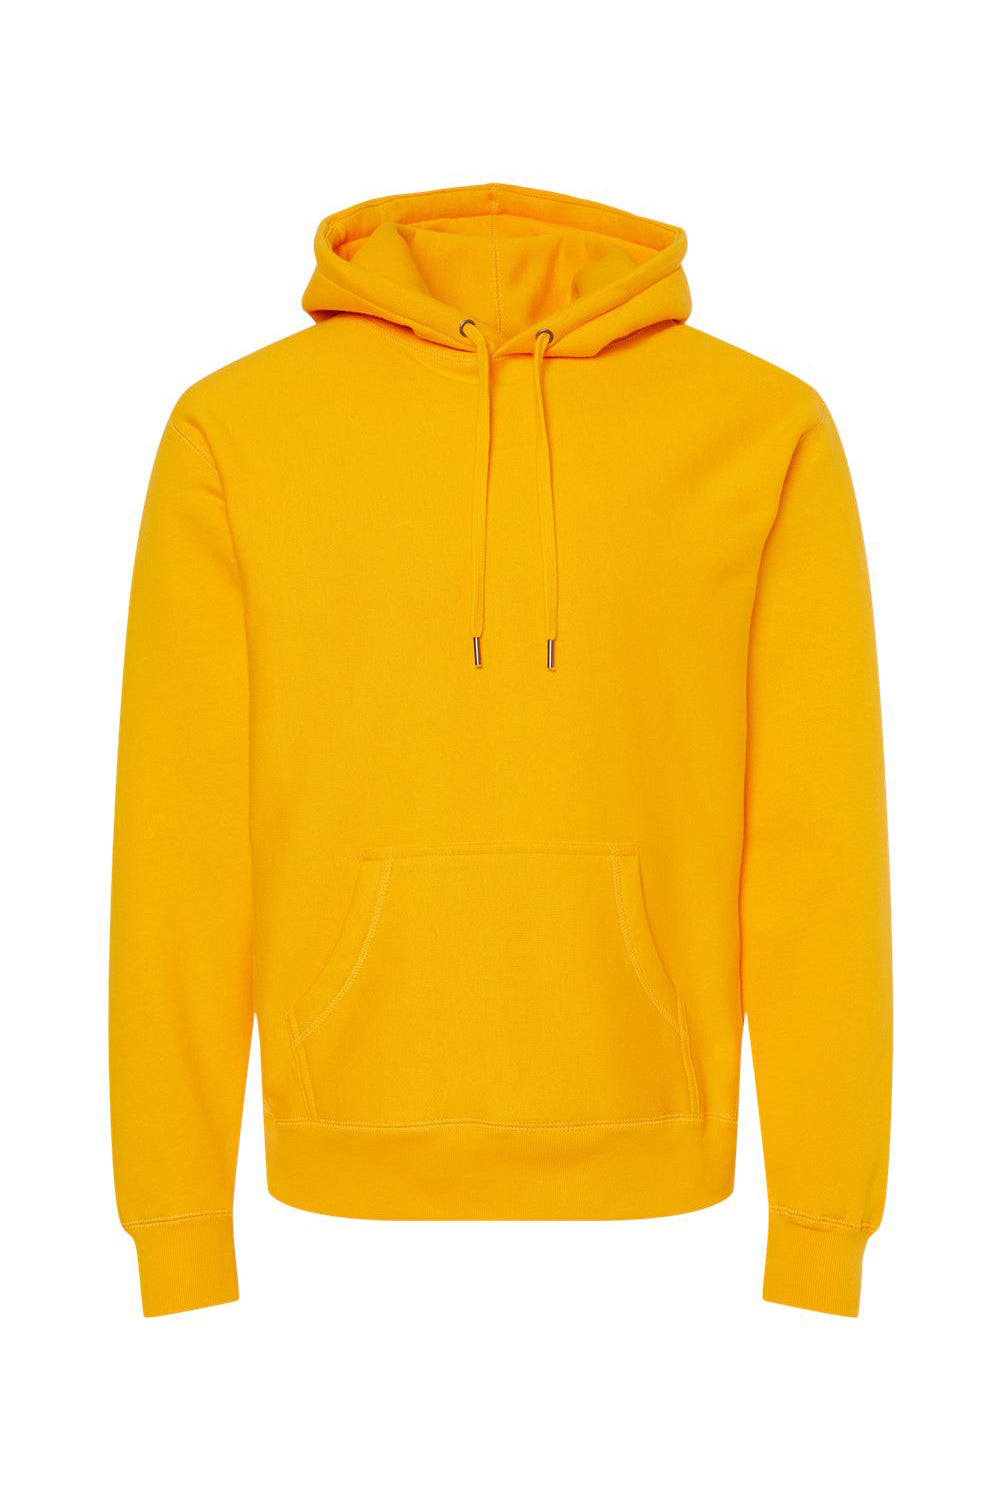 Independent Trading Co. IND5000P Mens Legend Hooded Sweatshirt Hoodie Gold Flat Front